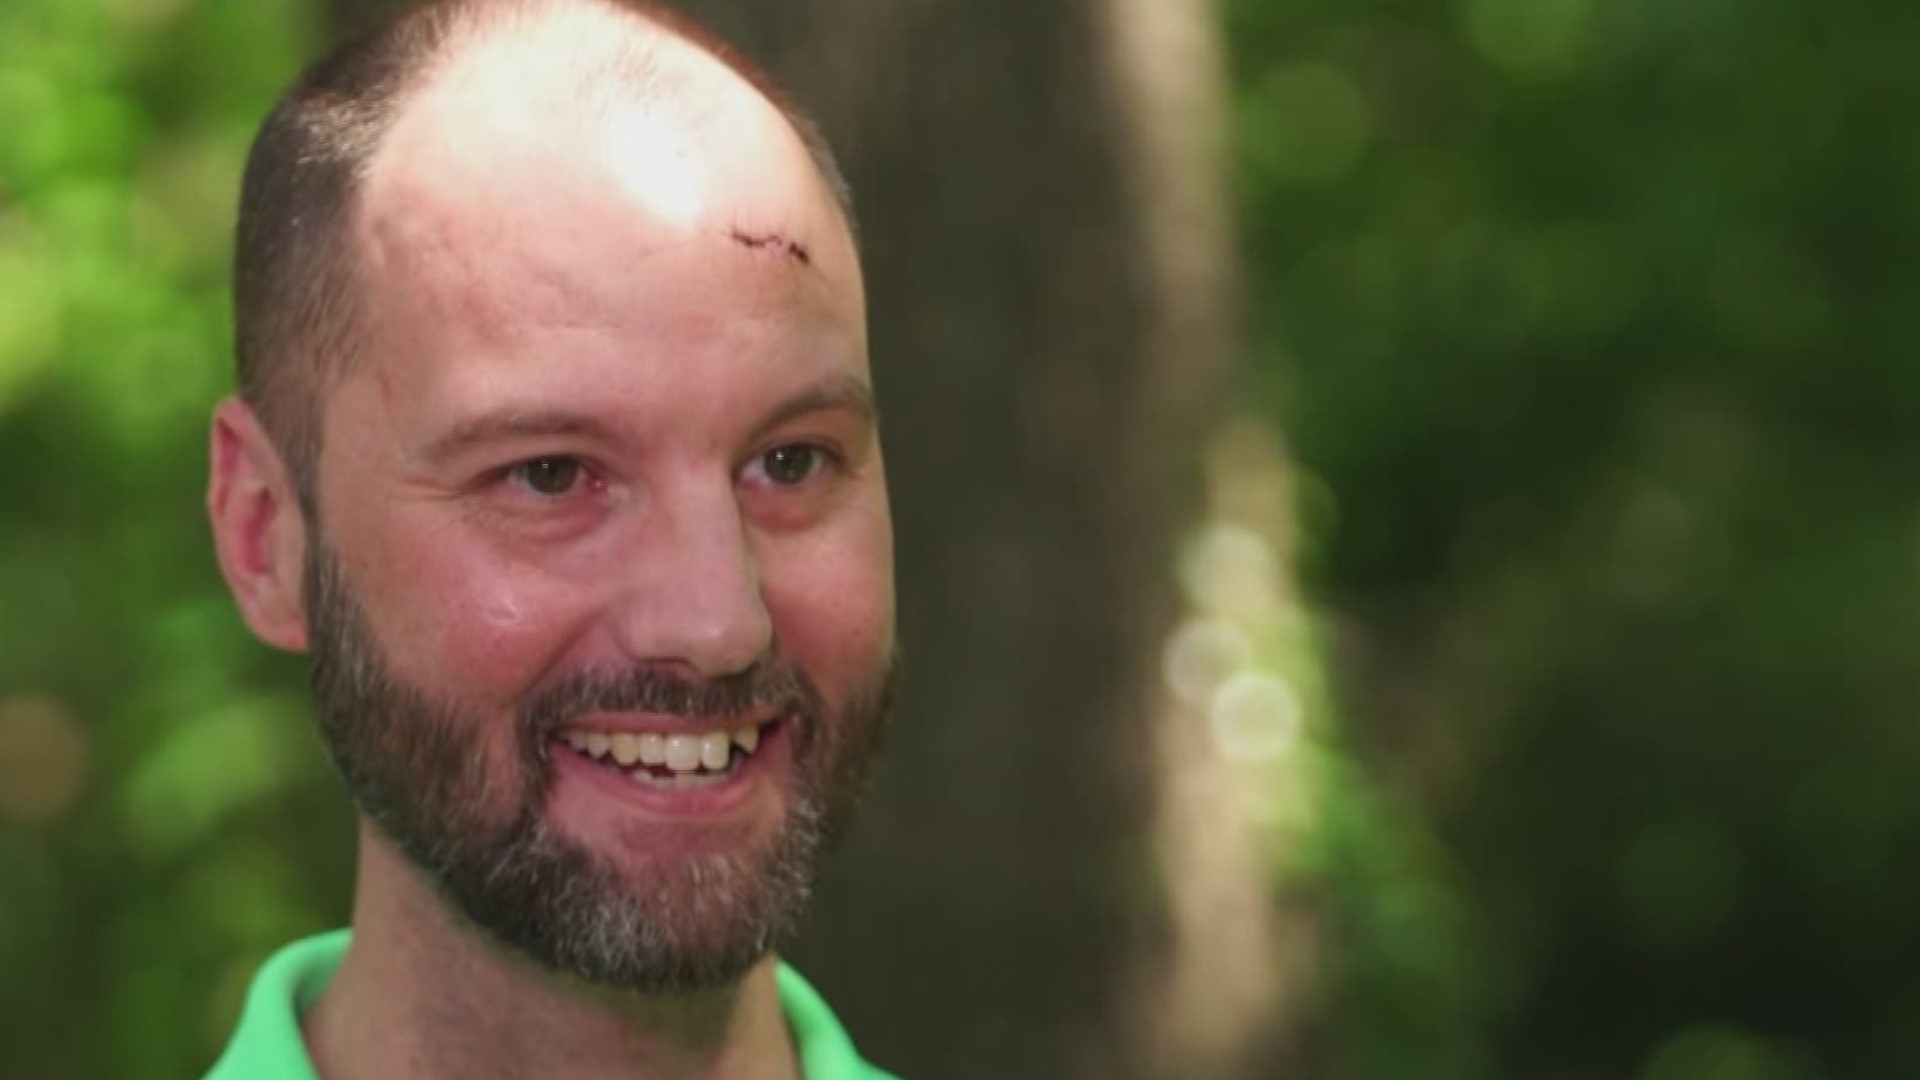 The 38-year-old Fort Worth hiker who went missing in the Arkansas wilderness for six nights talked with WFAA Thursday to share his story of survival.